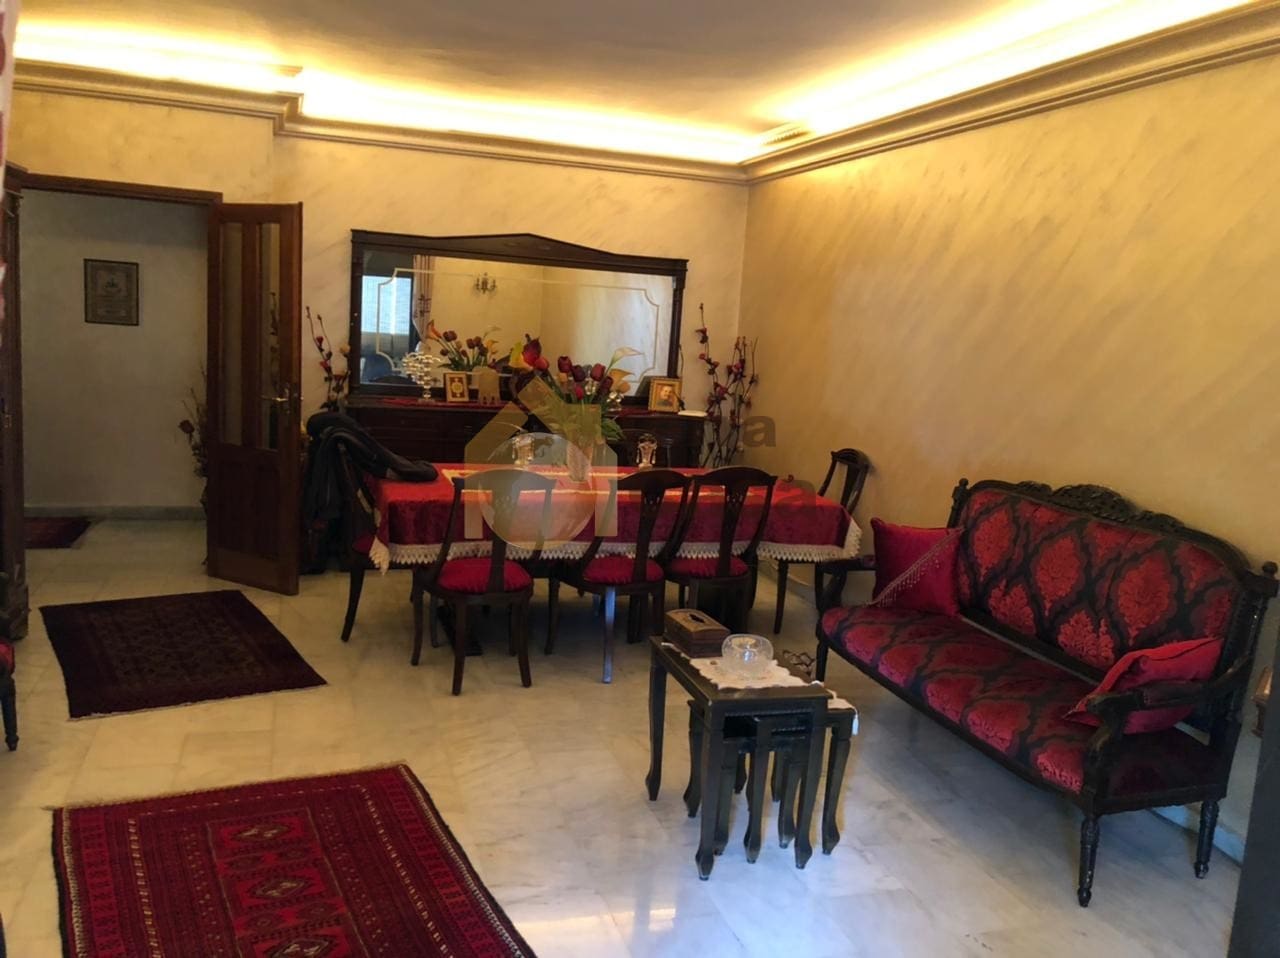 Fully decorated and furnished apartment nice location cash payment. Ref#3427